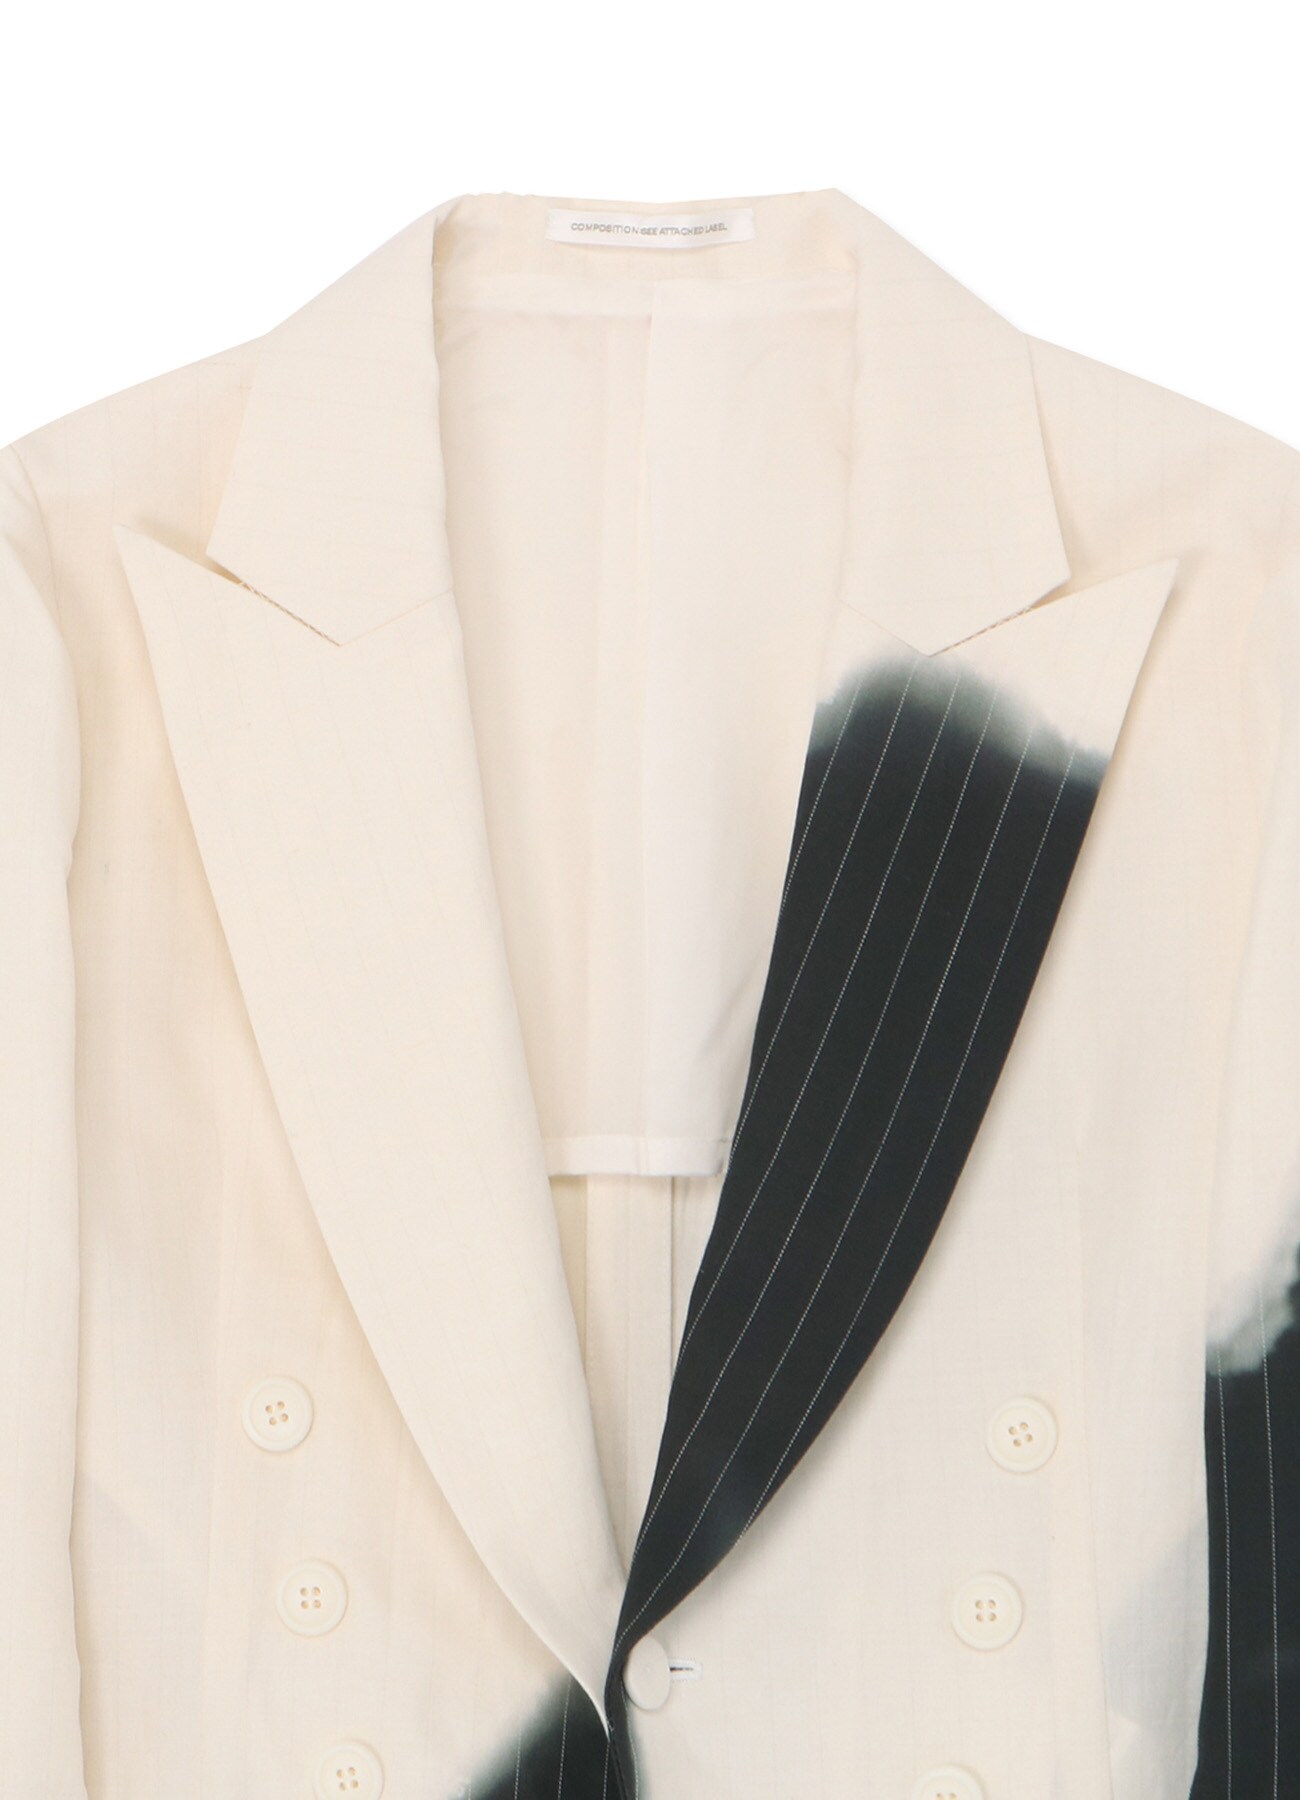 LINEN/COTTON SWALLOWTAIL JACKET WITH PARTIAL PINSTRIPE PATTERN